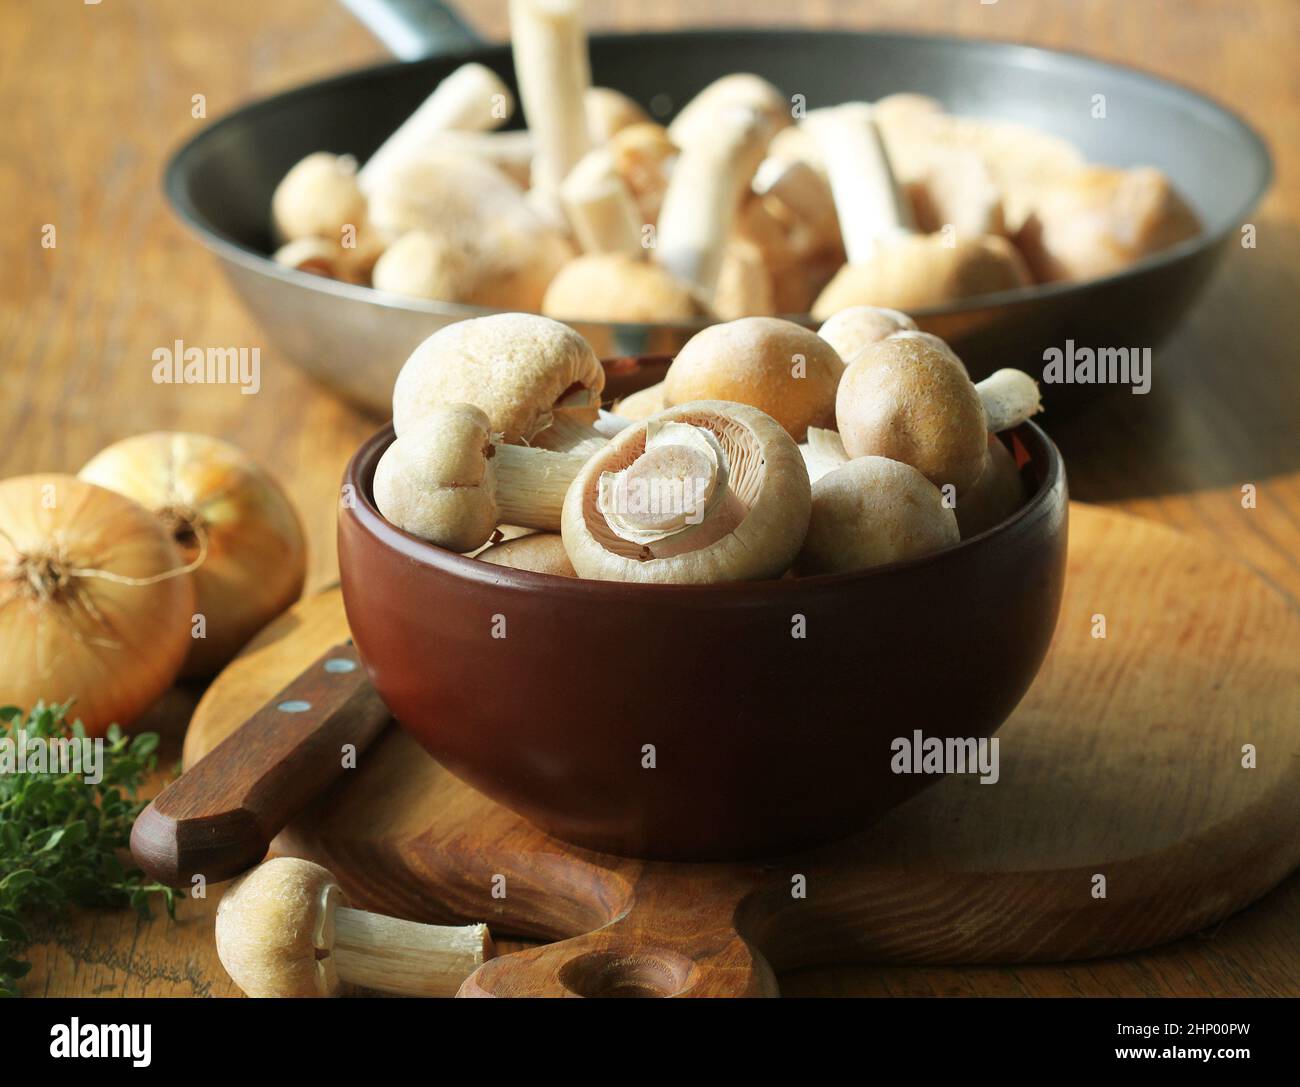 Raw Gypsy mushroom or Cortinarius caperatus mushrooms redy for cooking. Composition with wild mushrooms, herbs, onion . Stock Photo